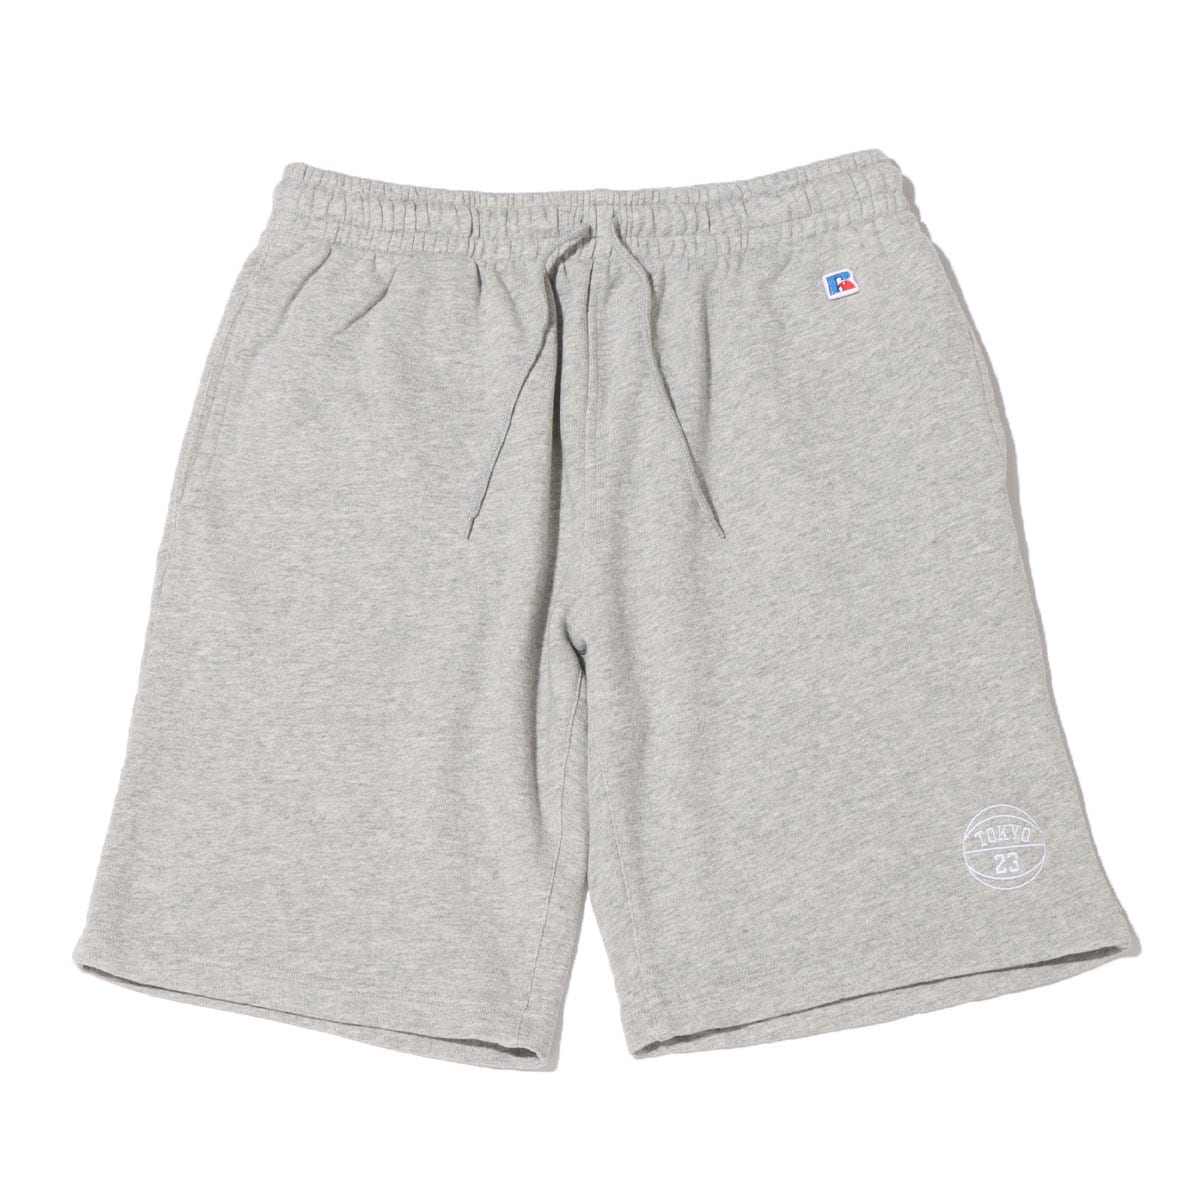 TOKYO 23 x RUSSELL ATHLETIC EMBROIDERY LOGO SWEAT SHORT GRAY 22SS-S_photo_large